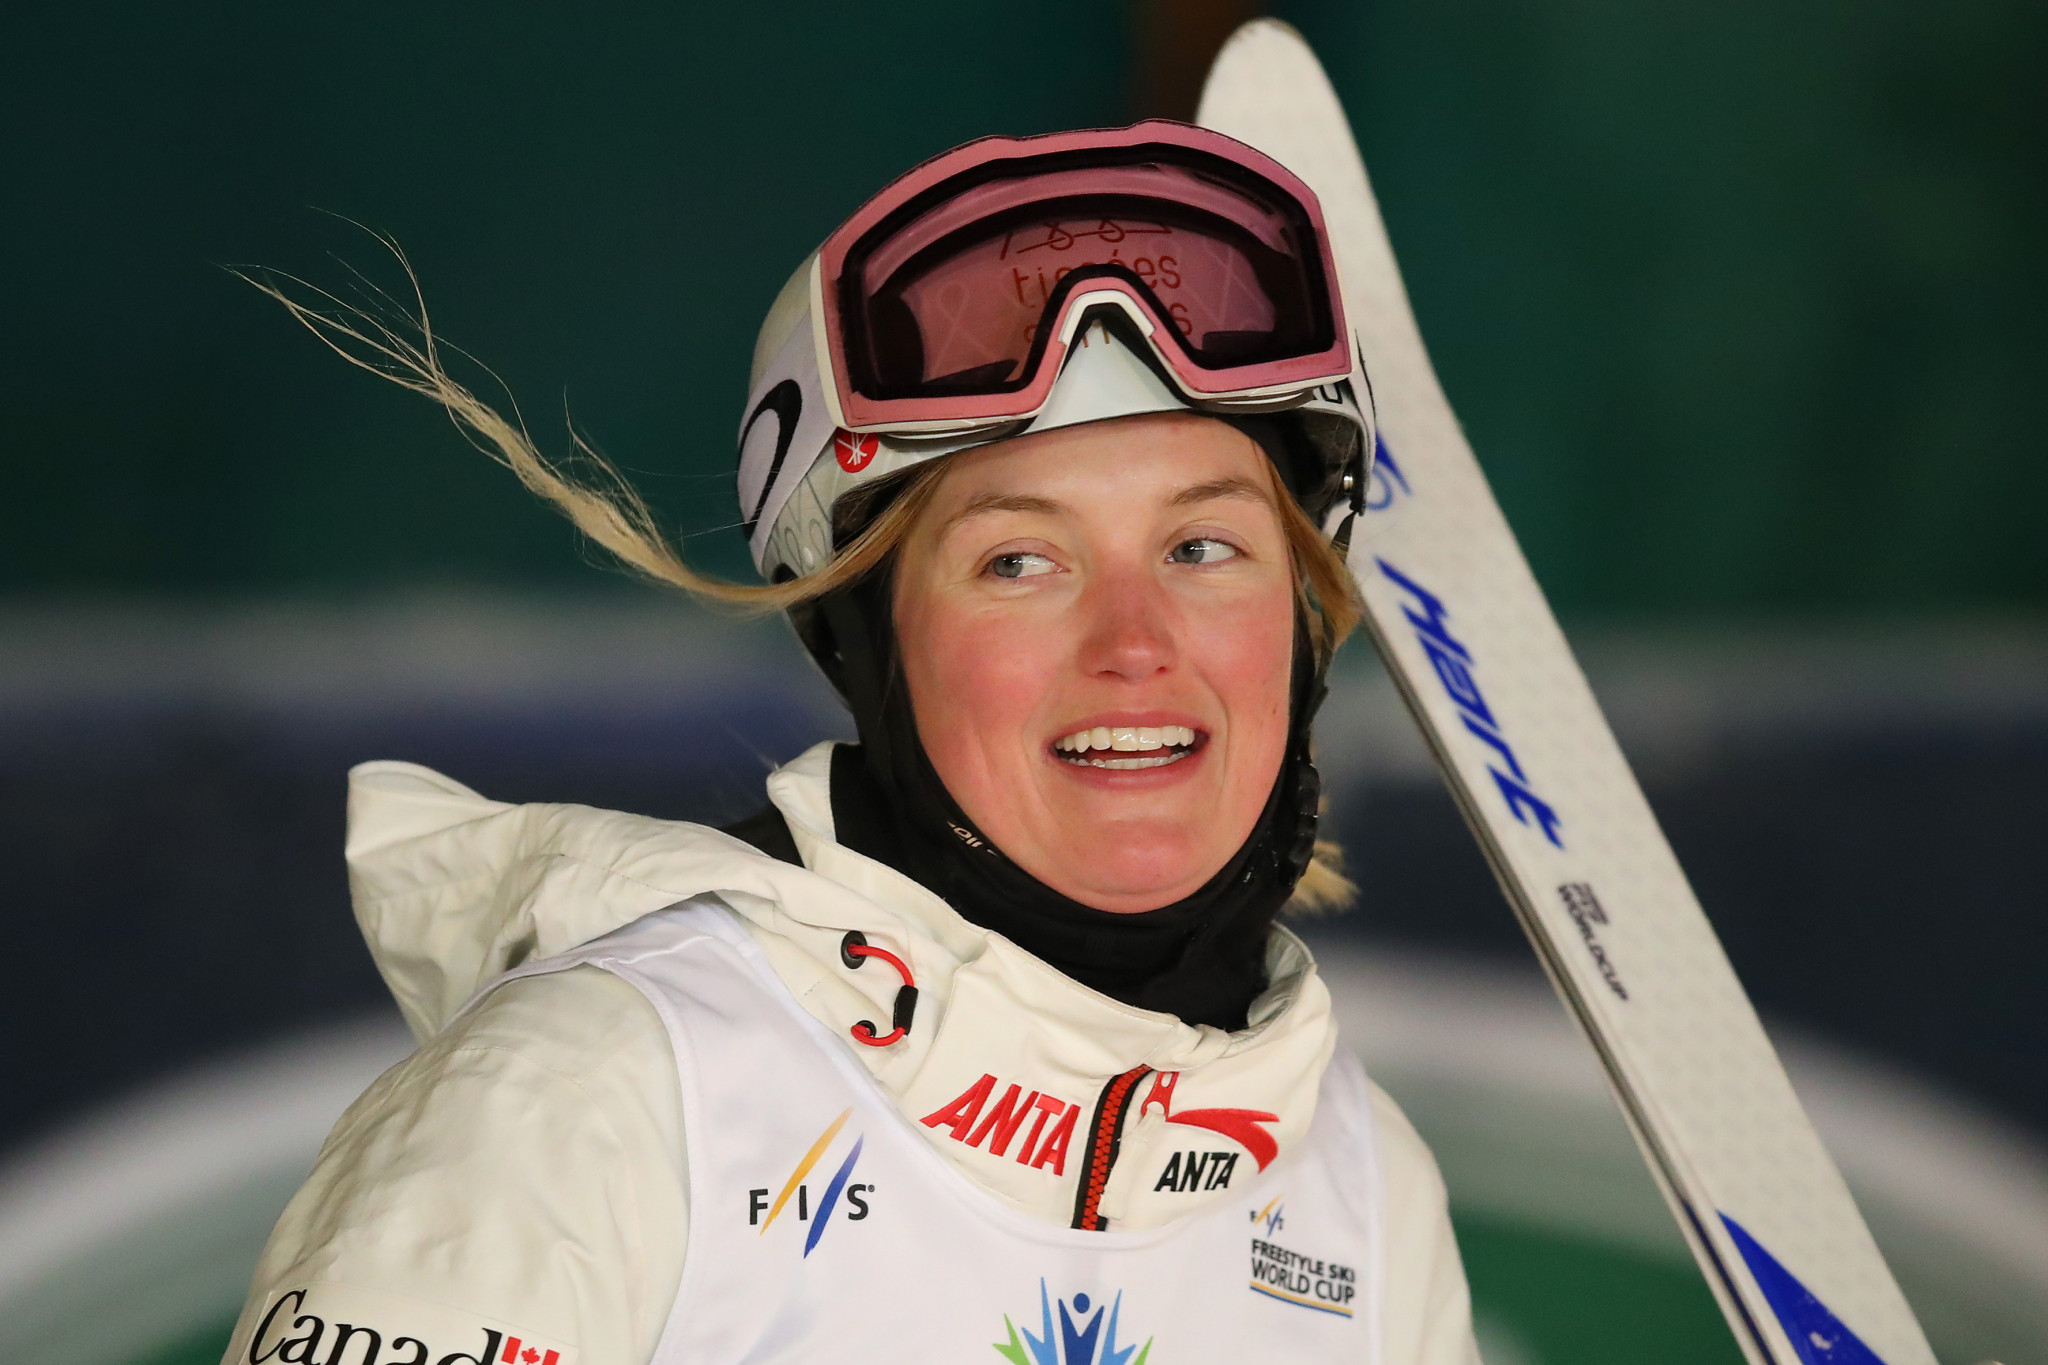 Justine Dufour-Lapointe is a Olympic gold medallist in 2014 at the moguls event ©Getty Images